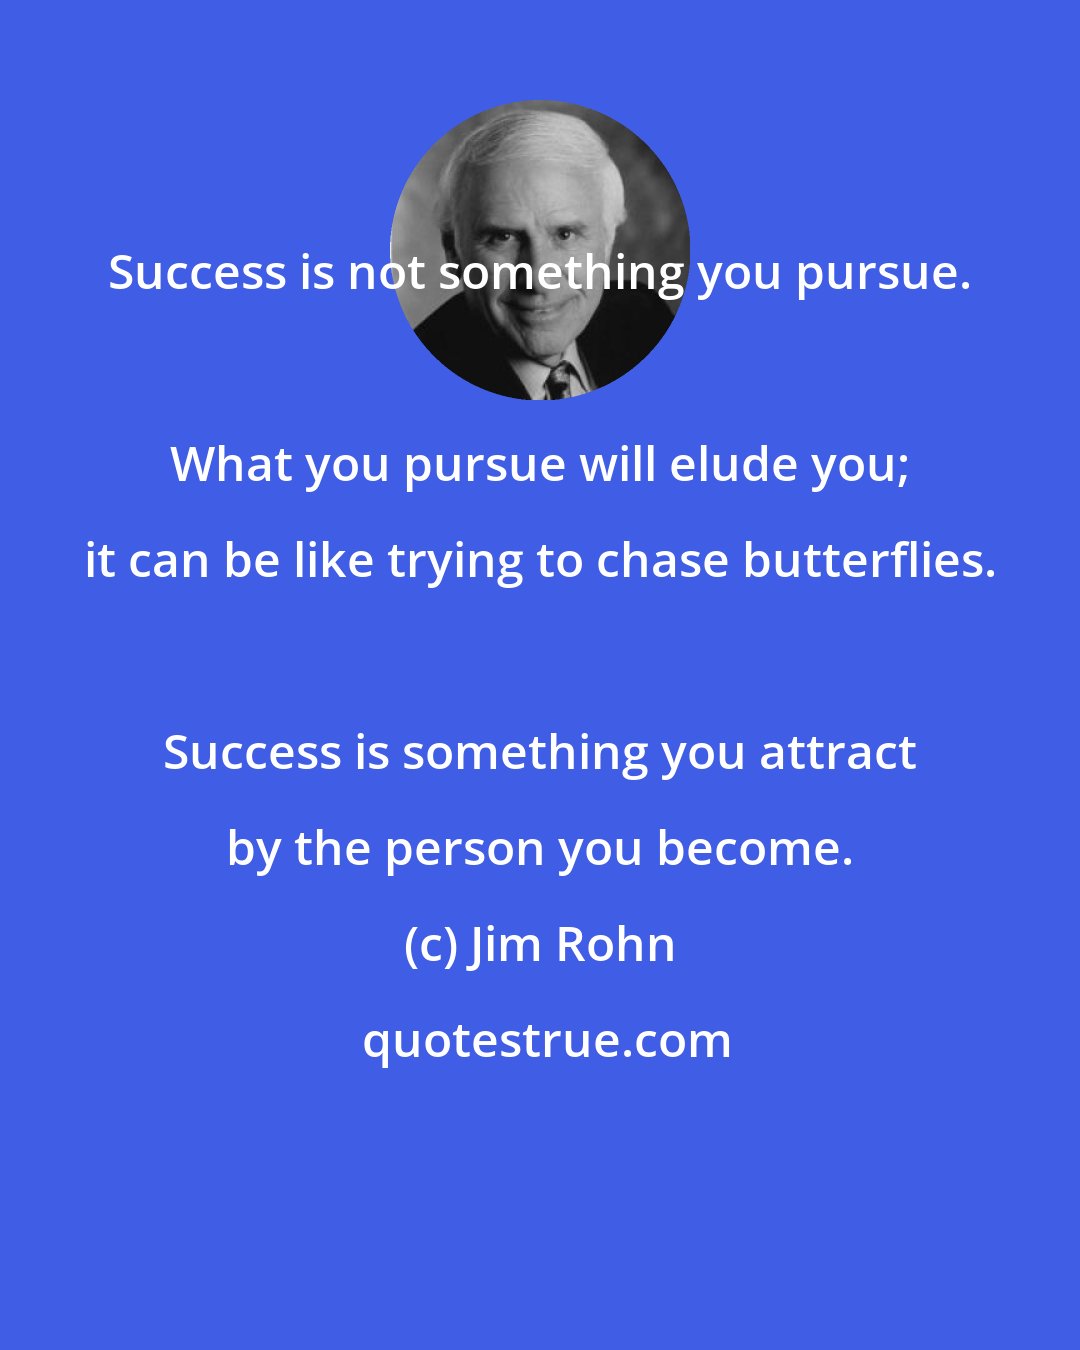 Jim Rohn: Success is not something you pursue. 
 
 What you pursue will elude you; it can be like trying to chase butterflies. 
 
 Success is something you attract by the person you become.